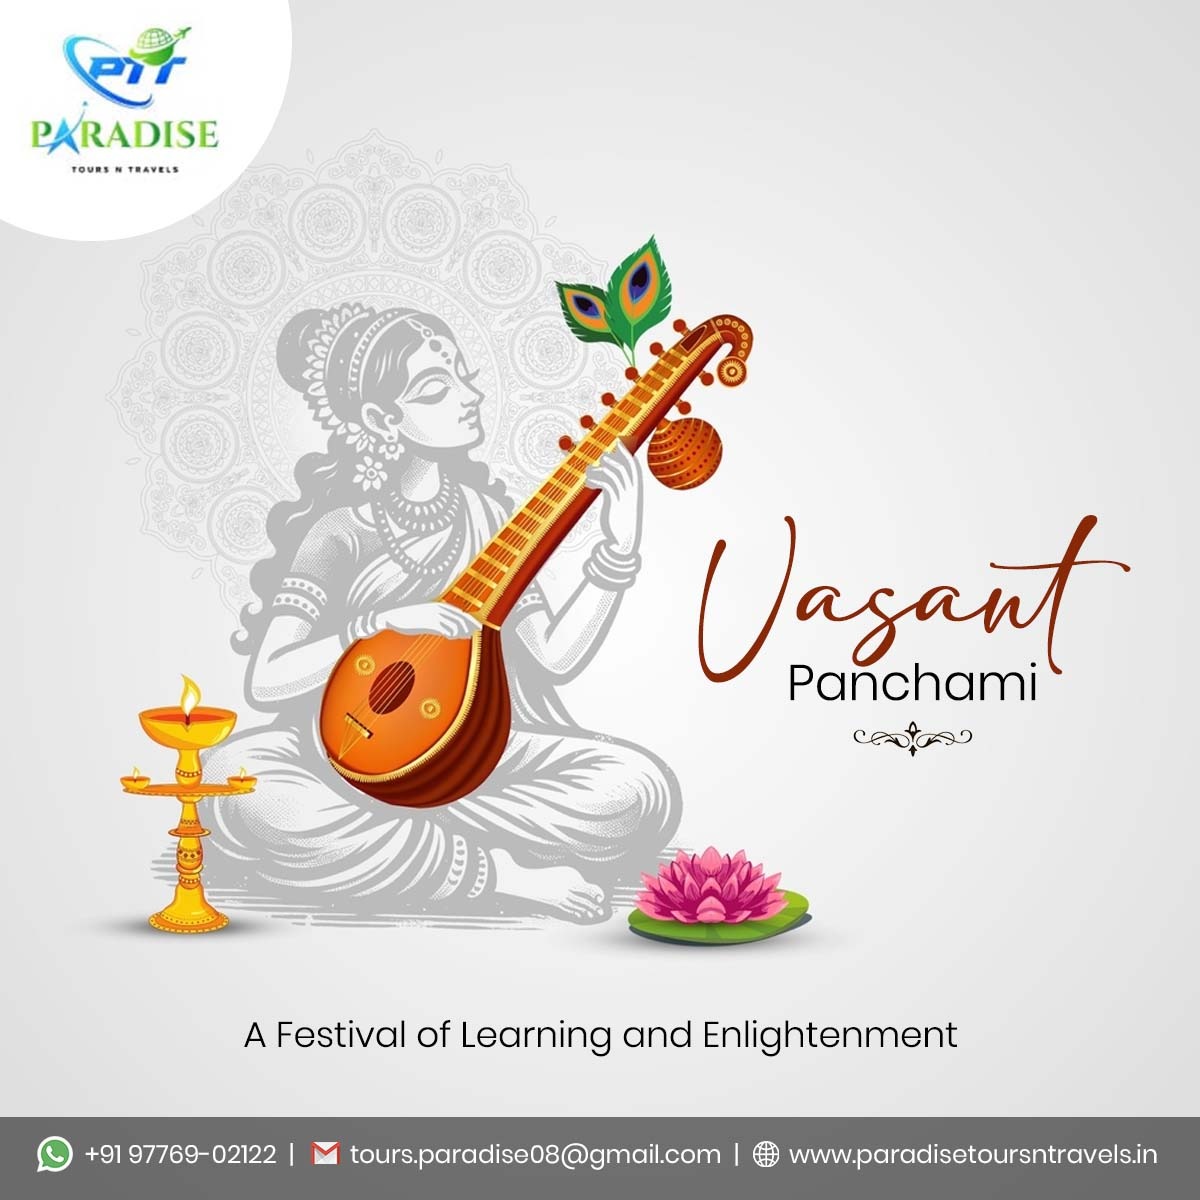 The power of knowledge is in all of us. May goddess Saraswati illuminate the glow and strive for more knowledge in us forever.

#goddess #basant #happyVasantpanchami #puja #love #indianfestival #art #knowledge #photography #Vasantpanchmi #goddesssaraswati #panchami